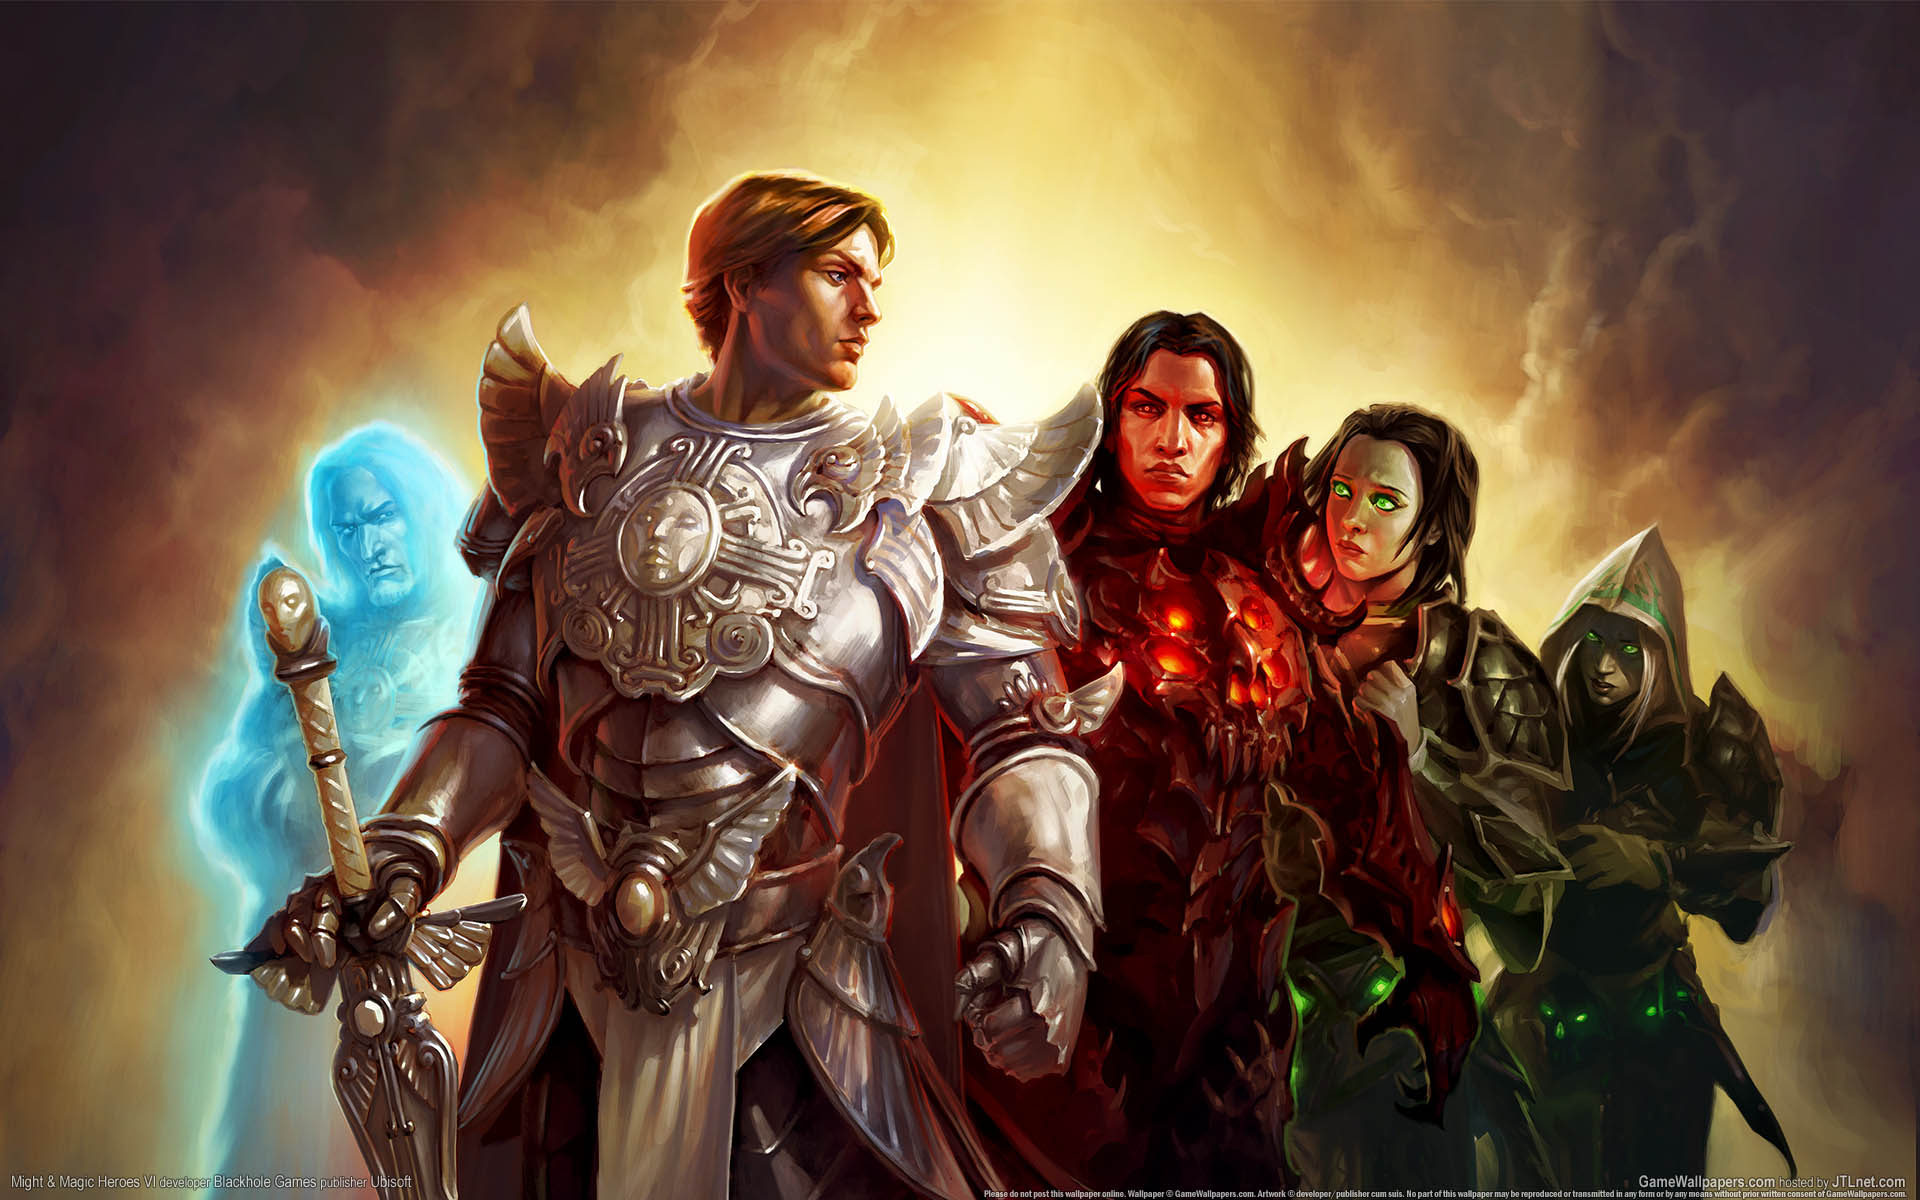 Might & Magic Heroes 6 achtergrond 02 1920x1200